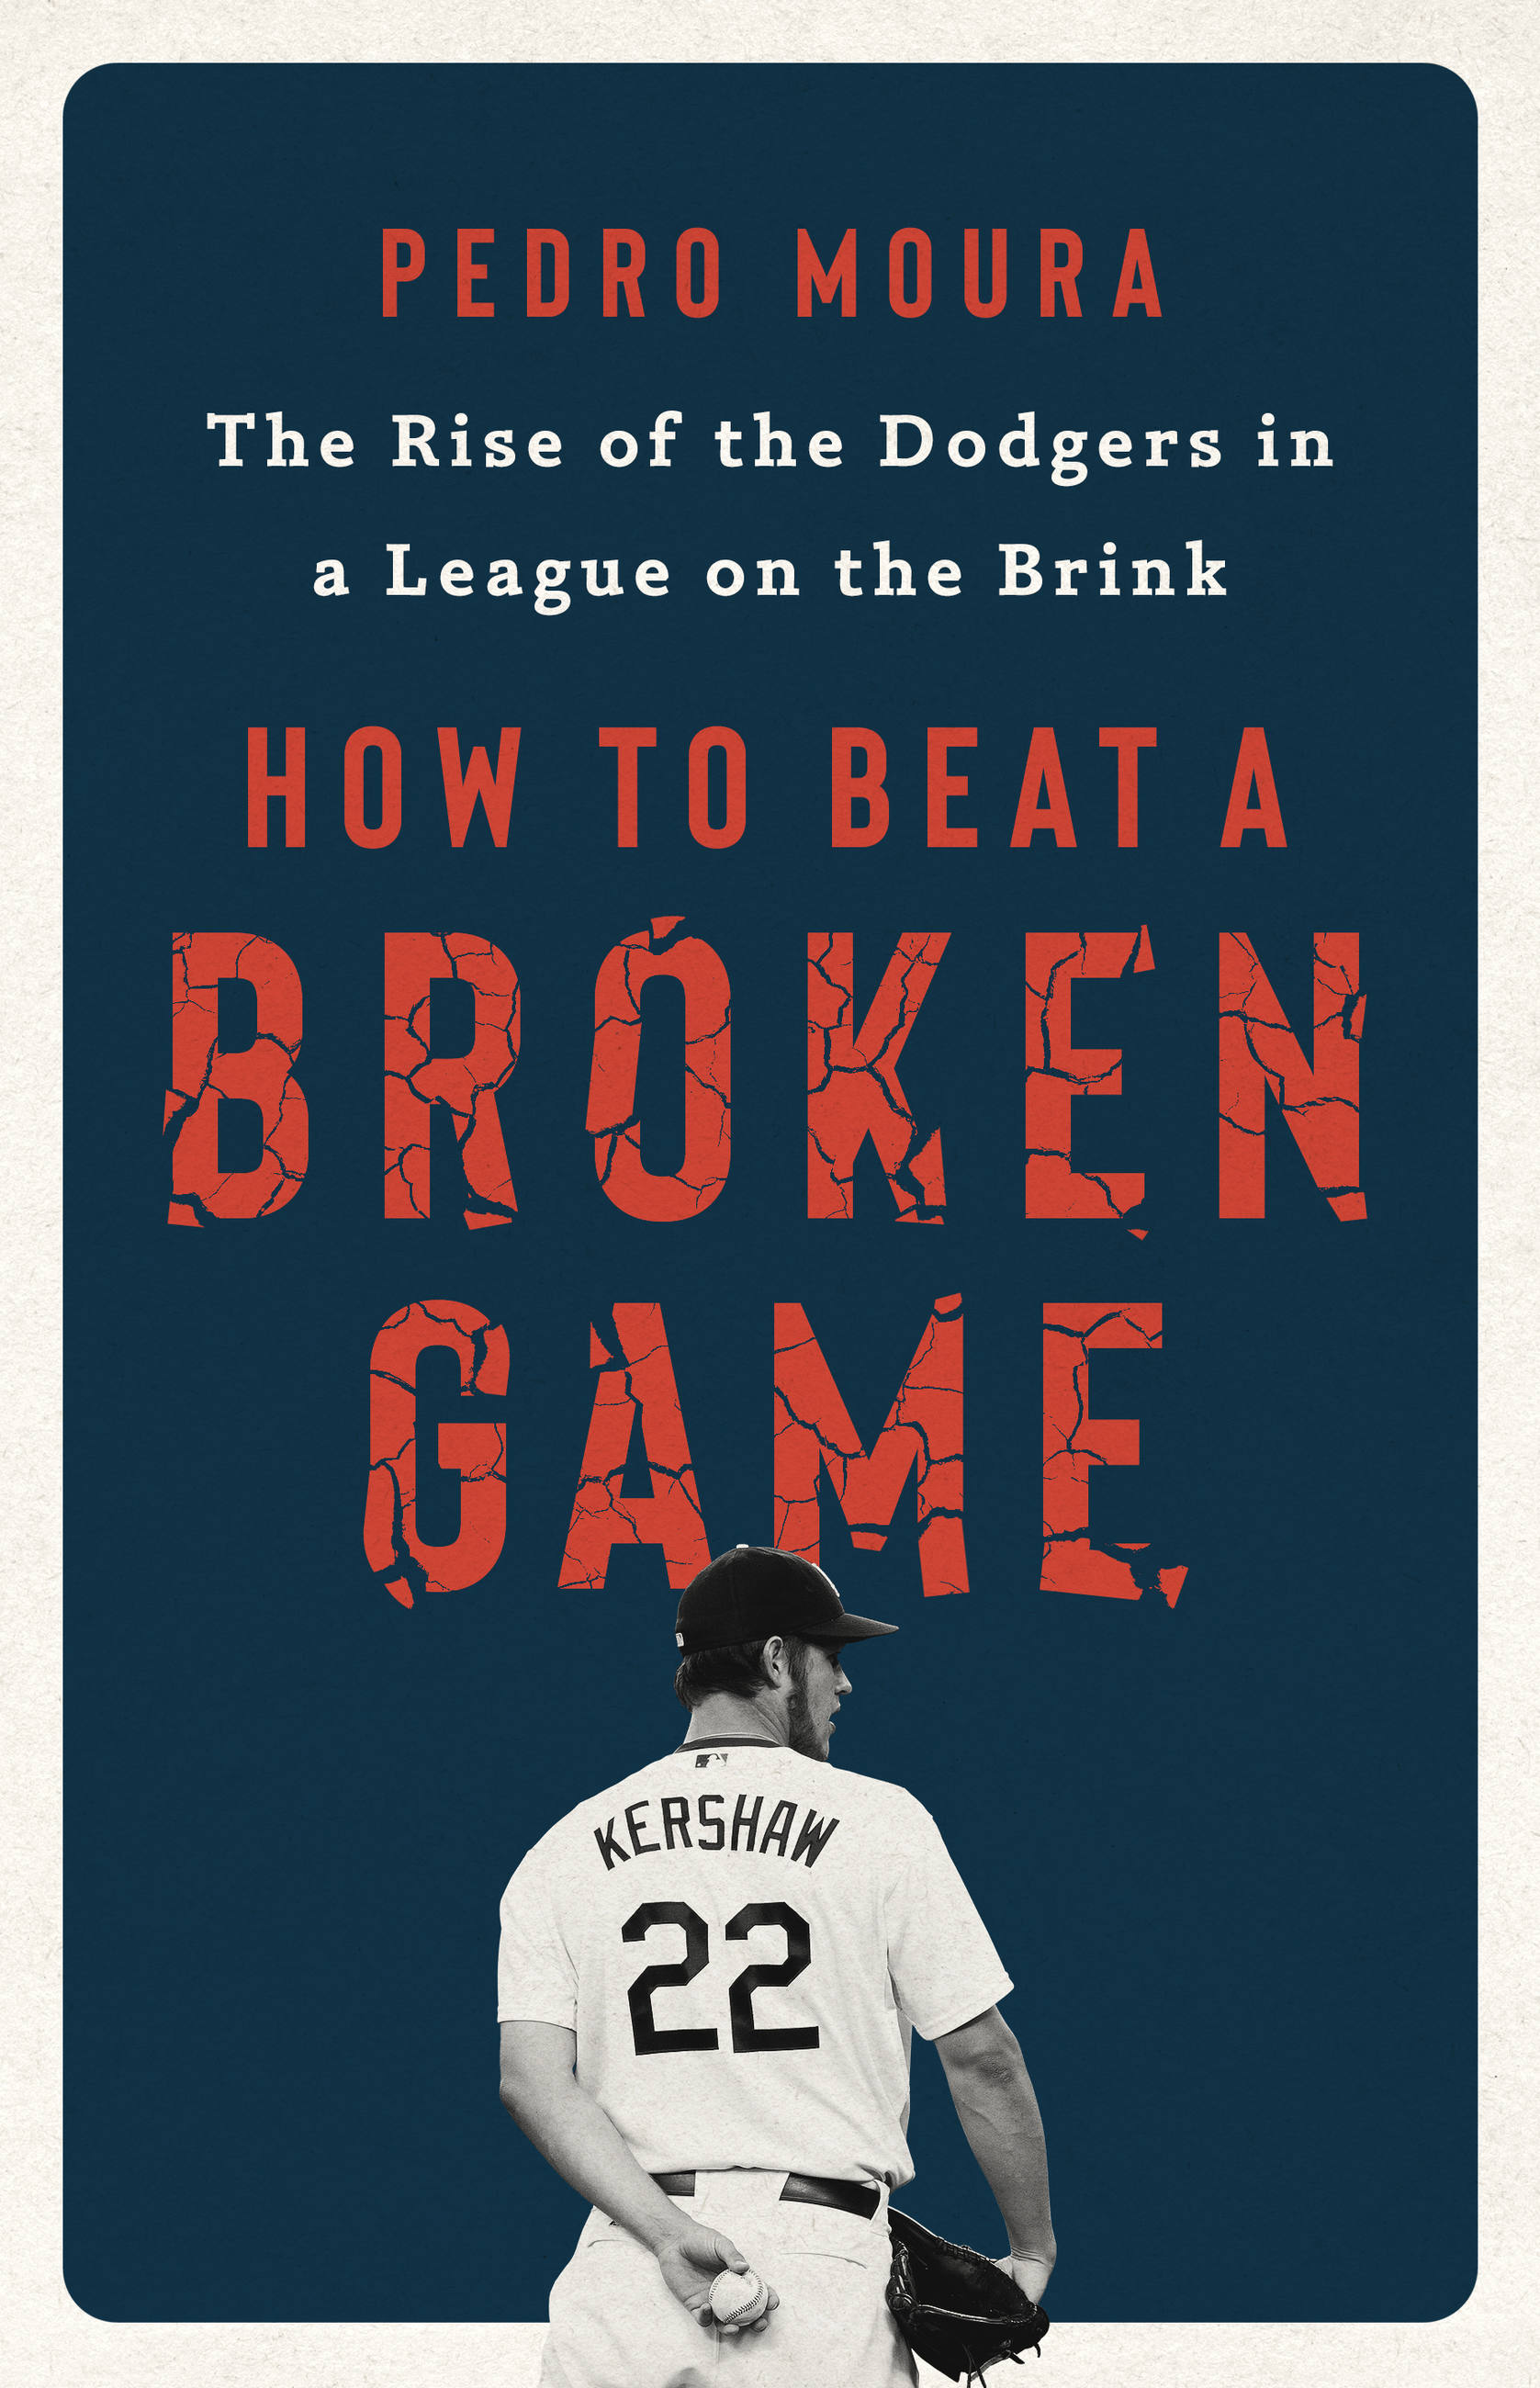 Moneyball: was the book that changed baseball built on a false